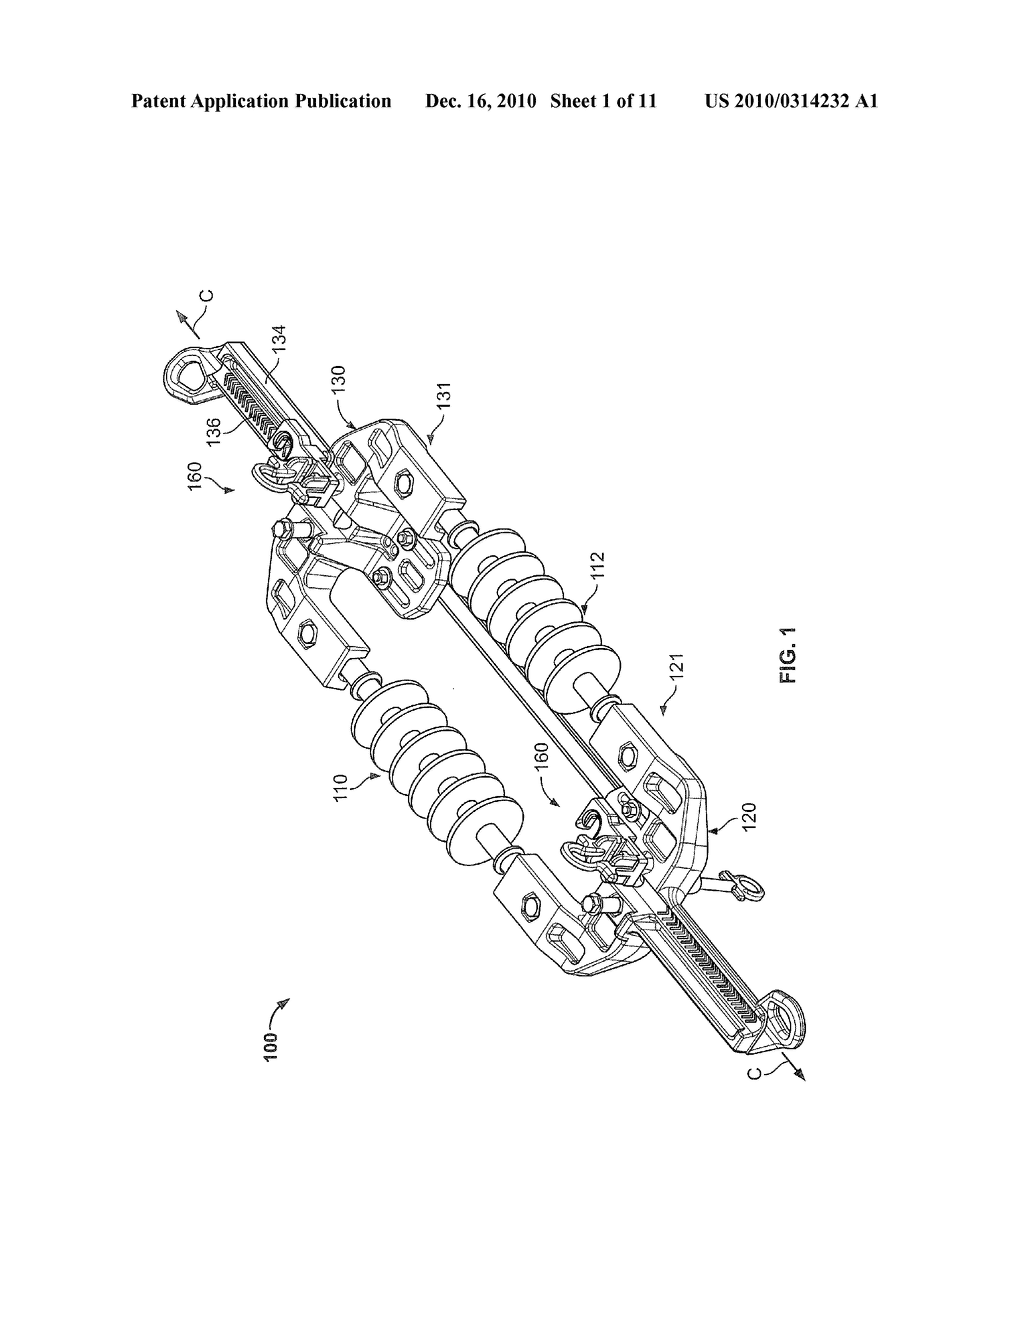 CABLE TERMINATION SYSTEMS AND ISOLATING APPARATUS FOR ELECTRICAL POWER TRANSMISSION CONDUCTORS AND METHODS USING THE SAME - diagram, schematic, and image 02